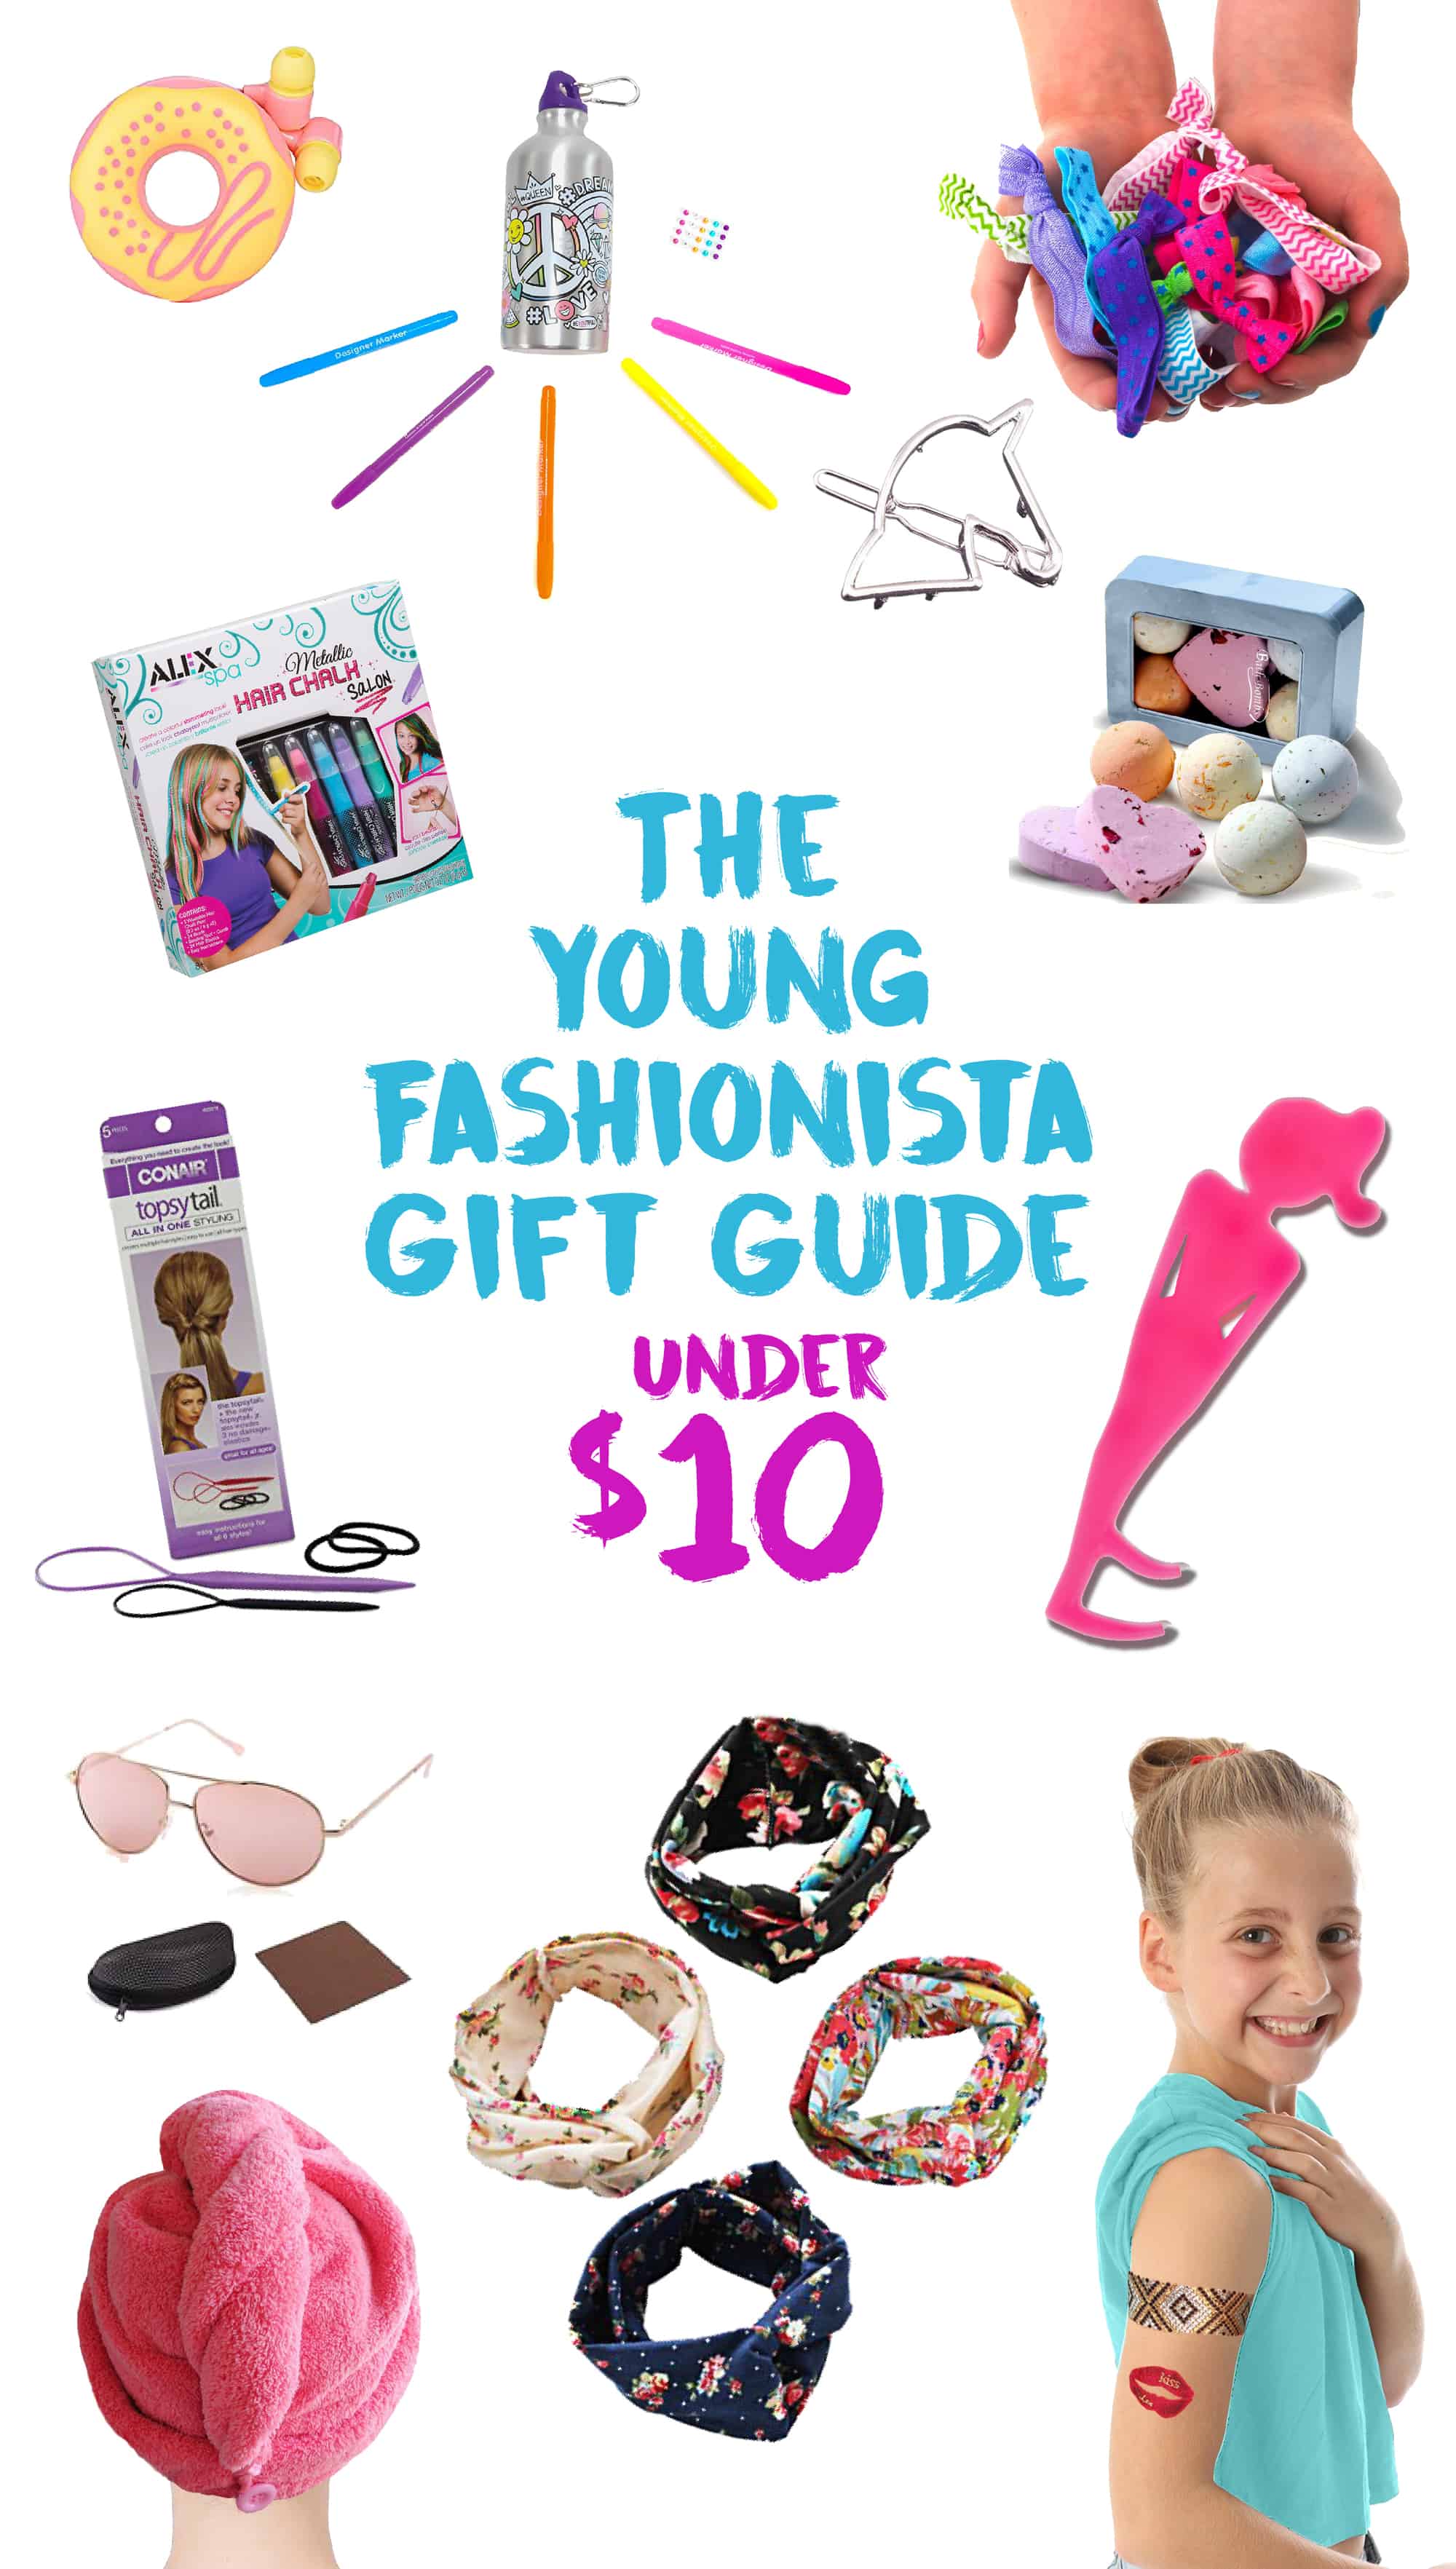 Graphic for "The Young Fashionista Gift Guide Under $10"